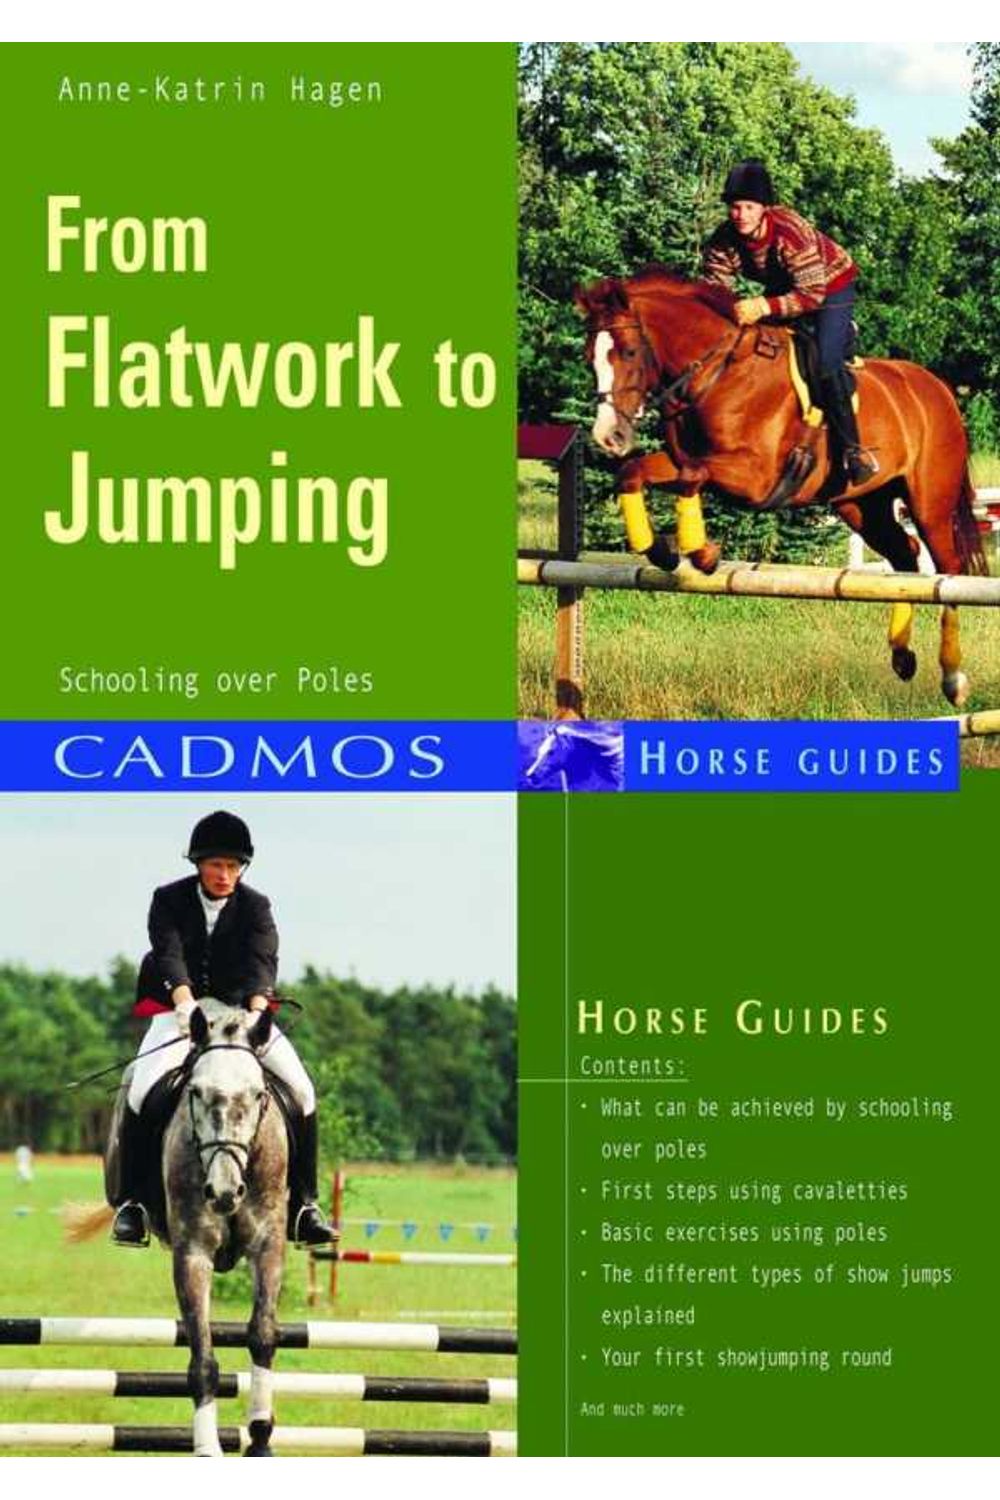 bw-from-flatwork-to-jumping-cadmos-publishing-9780857887047